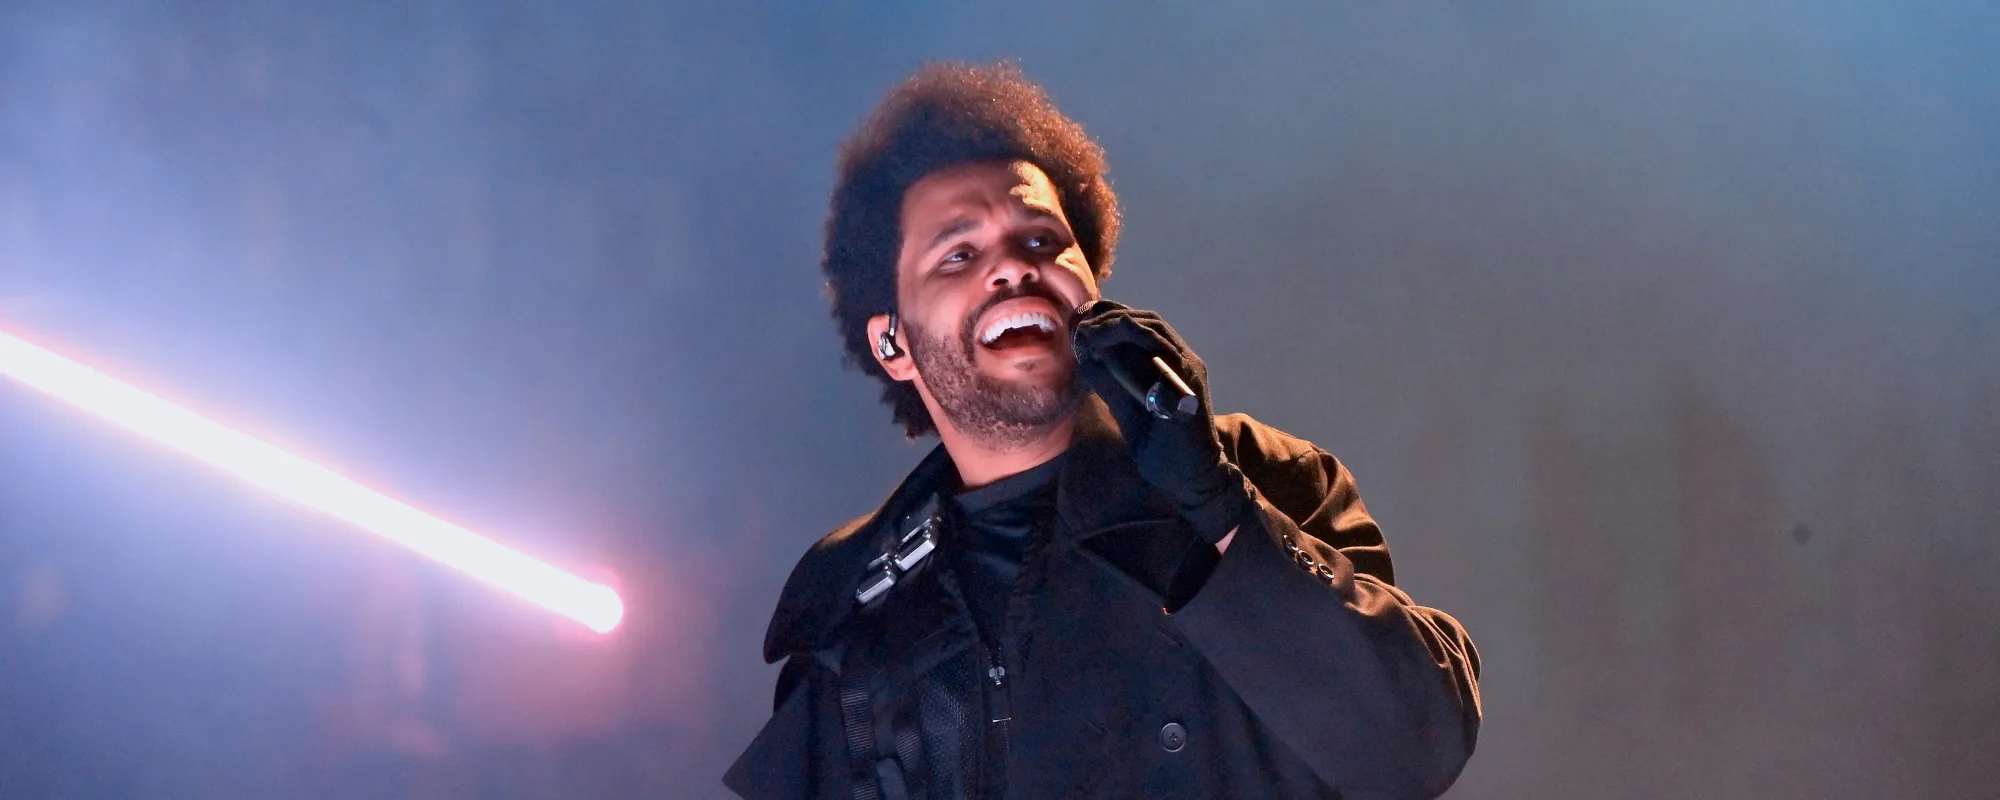 Copyright Lawsuit Against The Weeknd Over  “Call Out My Name” to be Settled